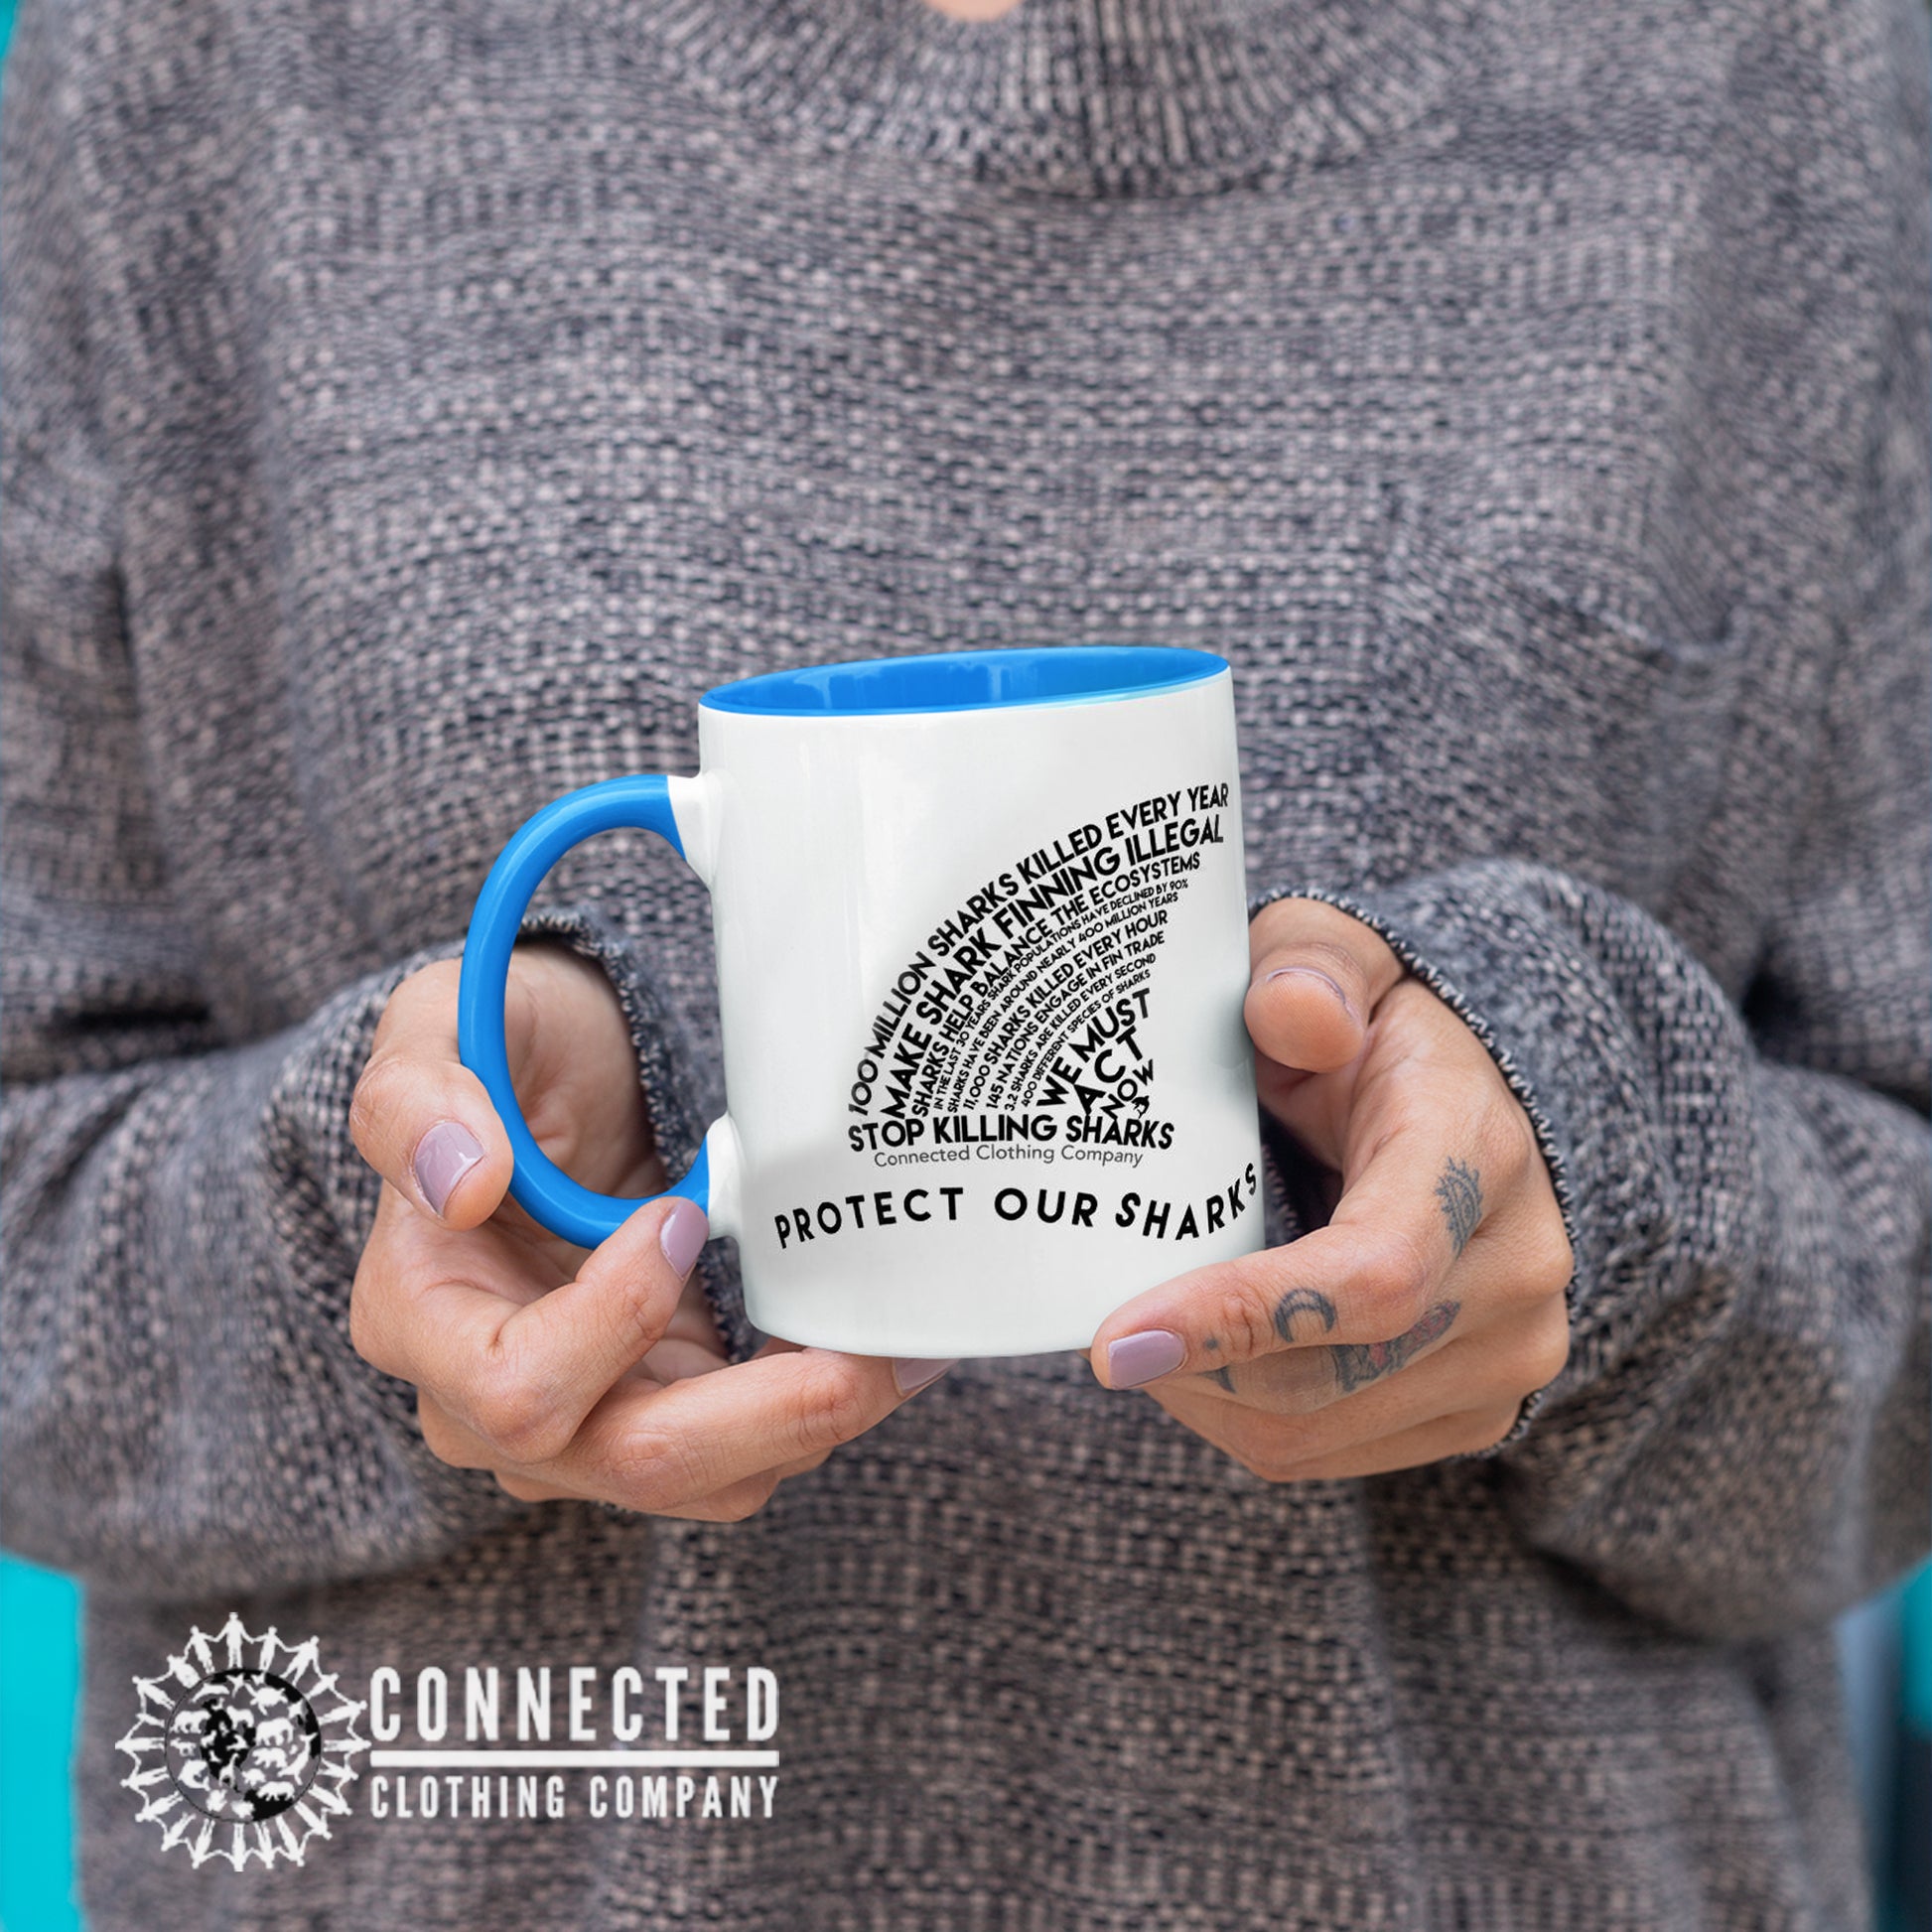 Model Holding Protect Our Sharks Mug With Blue Coloring on Inside, Rim, and Handle - sweetsherriloudesigns - Ethically and Sustainably Made - 10% donated to Oceana shark conservation